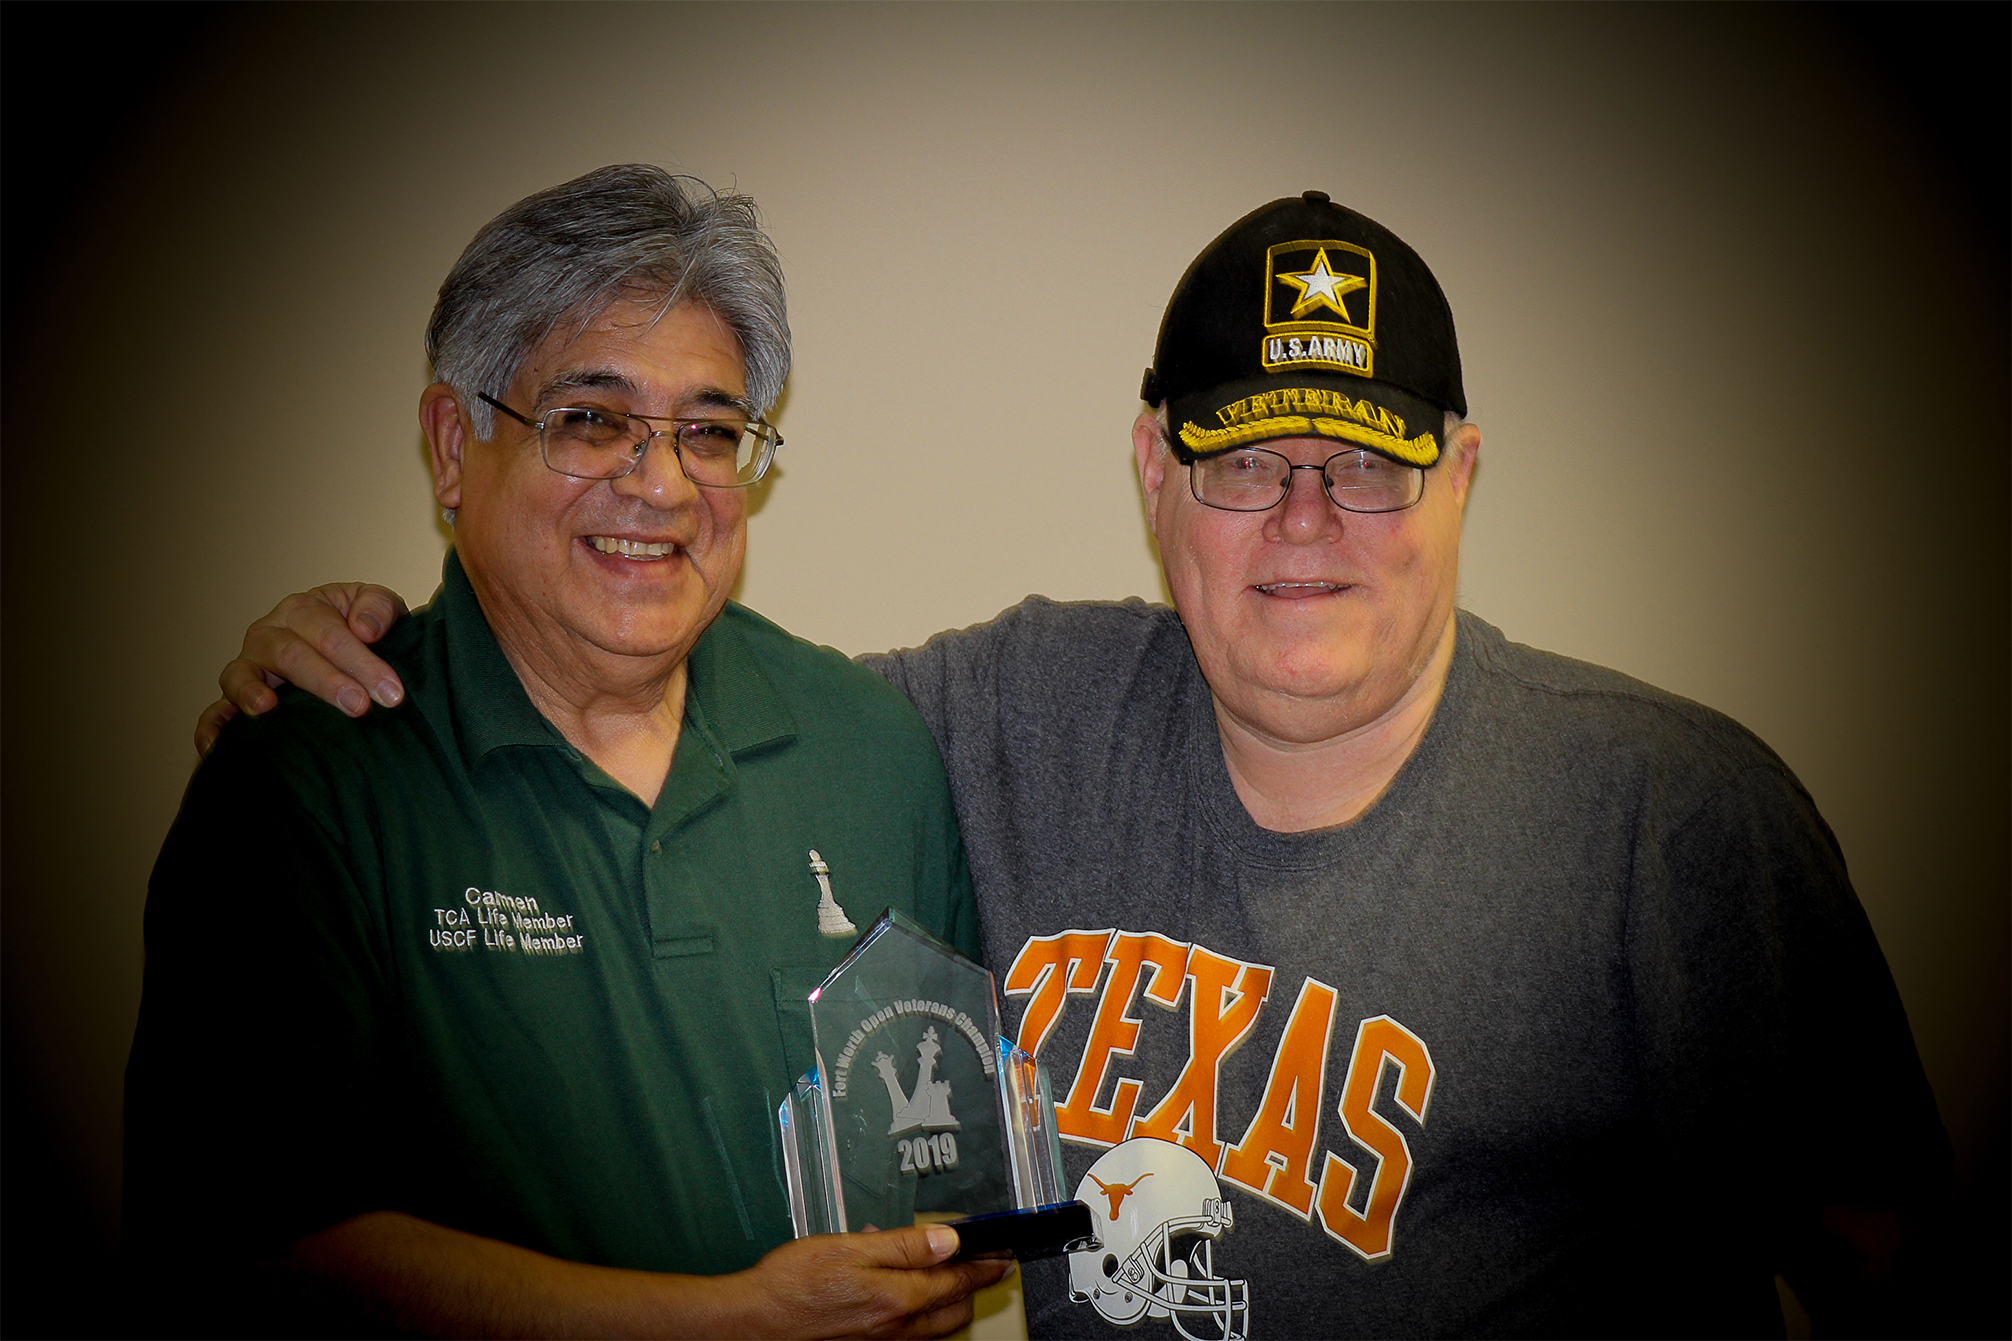 In March, Carmen Chairez (left) won his second straight Fort Worth Open Veterans Chess Championship.  In all the excitement both he and Troy Gillispie, the 2019 Fort Worth Veterans Chess Champion, went home with each other's trophy.  Jim Hollingsworth (right) was Chief TD of that event, too.  RRSO XVII was a great opportunity to exchange and marry the right trophy up with the right Veteran.  Photo by Sheryl McBroom.